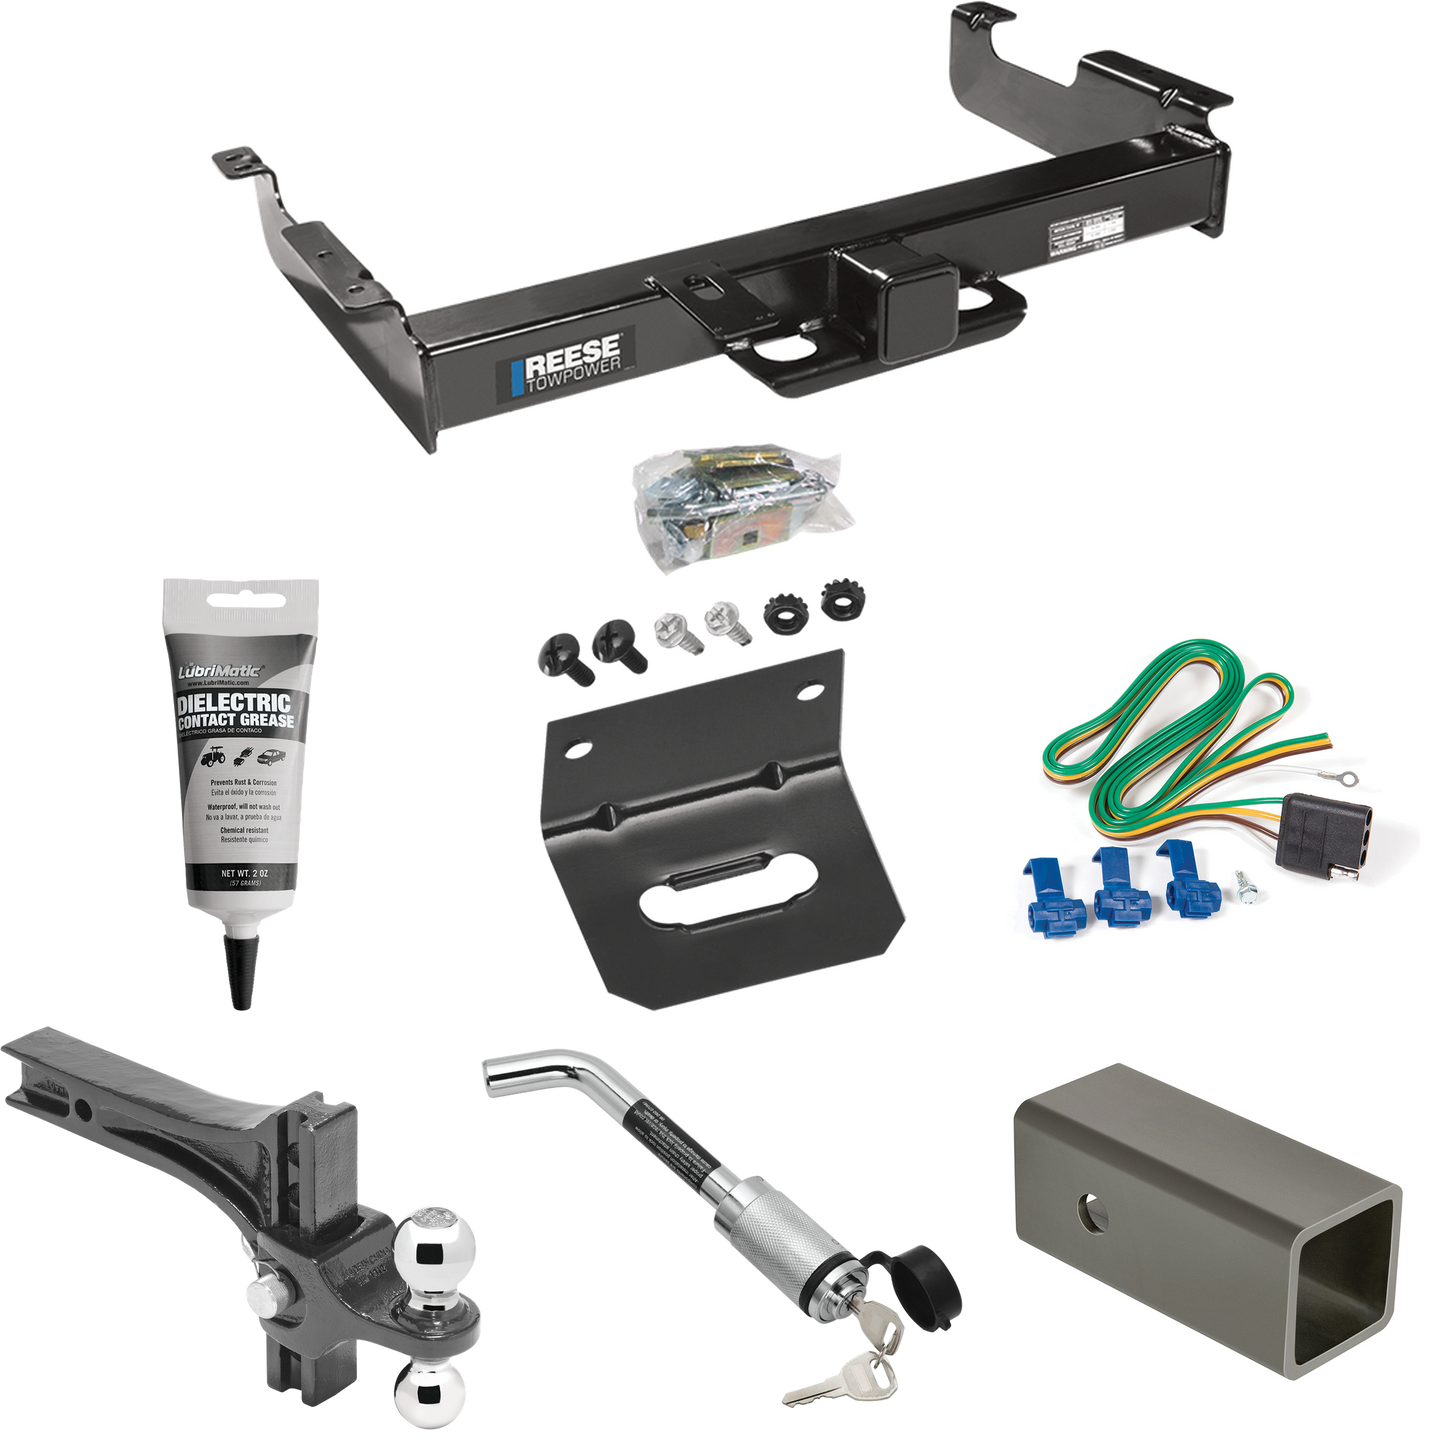 Fits 1996-1999 Chevrolet Express 3500 Trailer Hitch Tow PKG w/ 4-Flat Wiring Harness + 2-1/2" to 2" Adapter 6" Length + Adjustable Drop Rise Dual Ball Ball Mount 2" & 2-5/16" Trailer Balls + Hitch Lock + Wiring Bracket + Electric Grease By Reese Towp